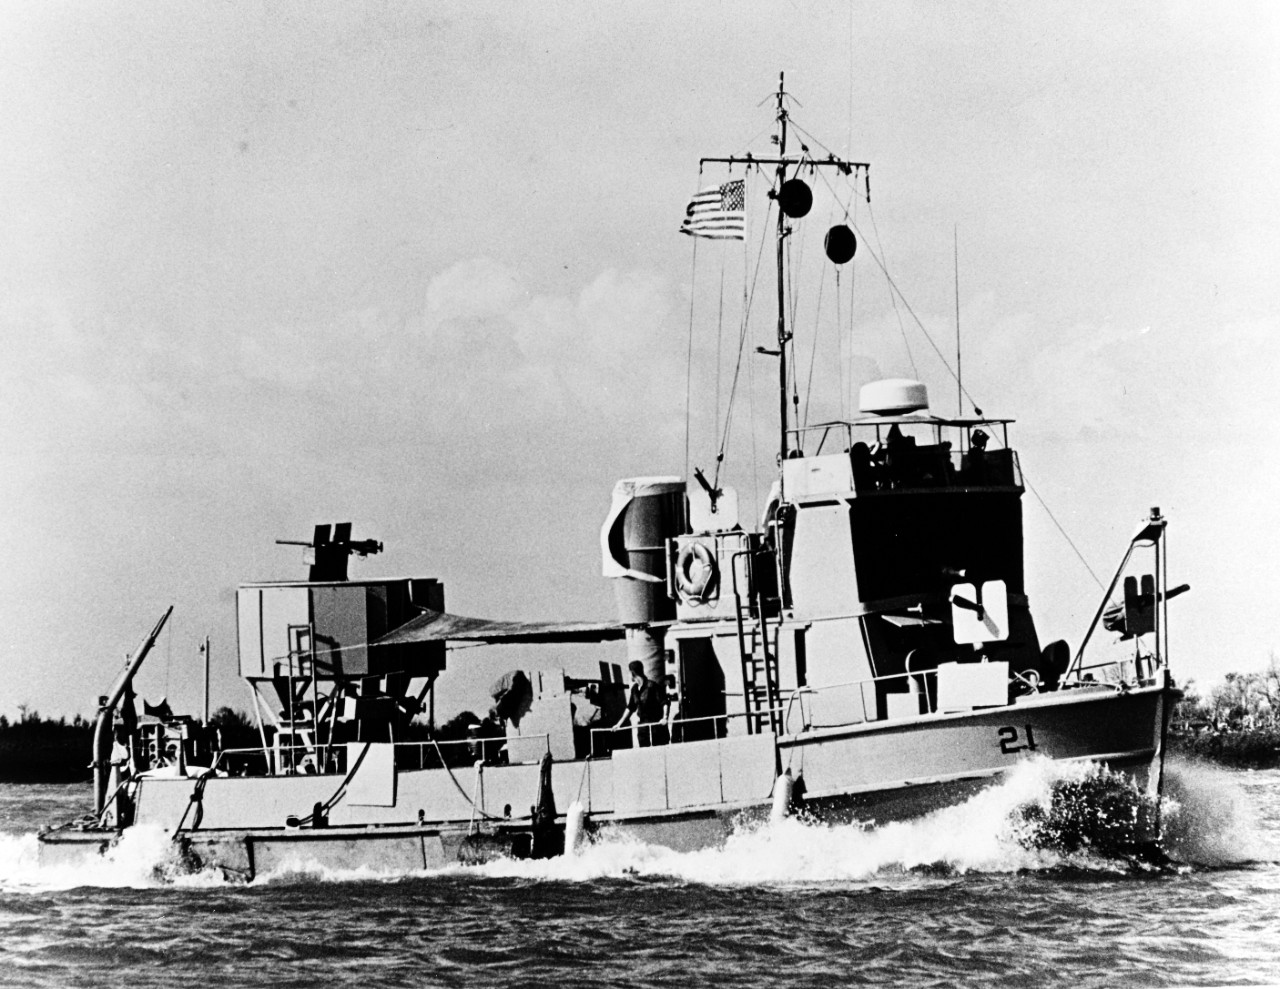 A U.S. Navy MSB Minesweeping Boat